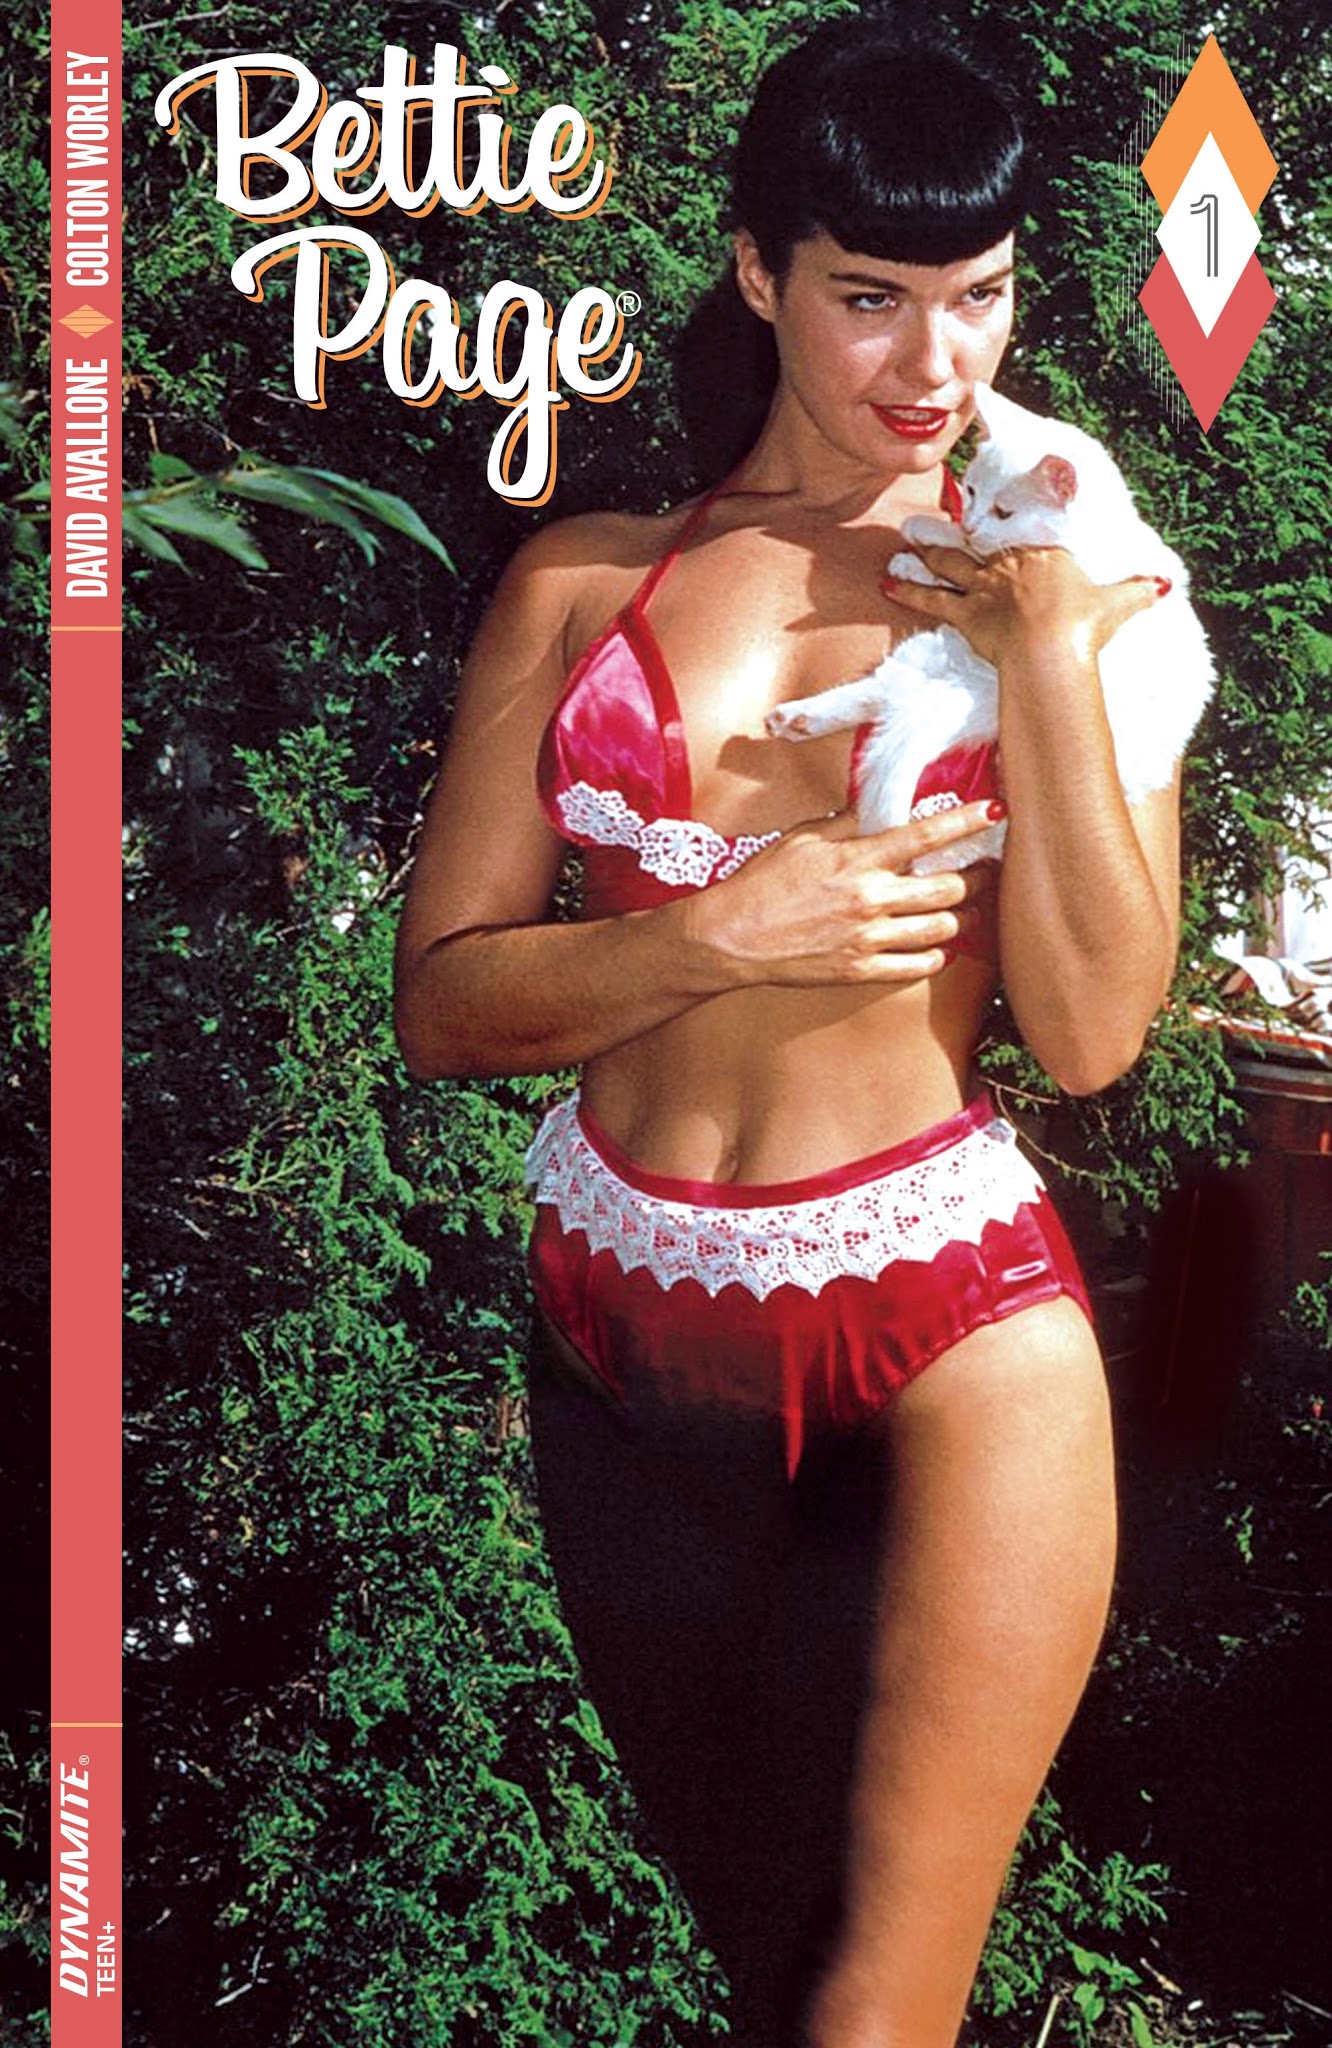 Read online Bettie Page comic -  Issue #1 - 4